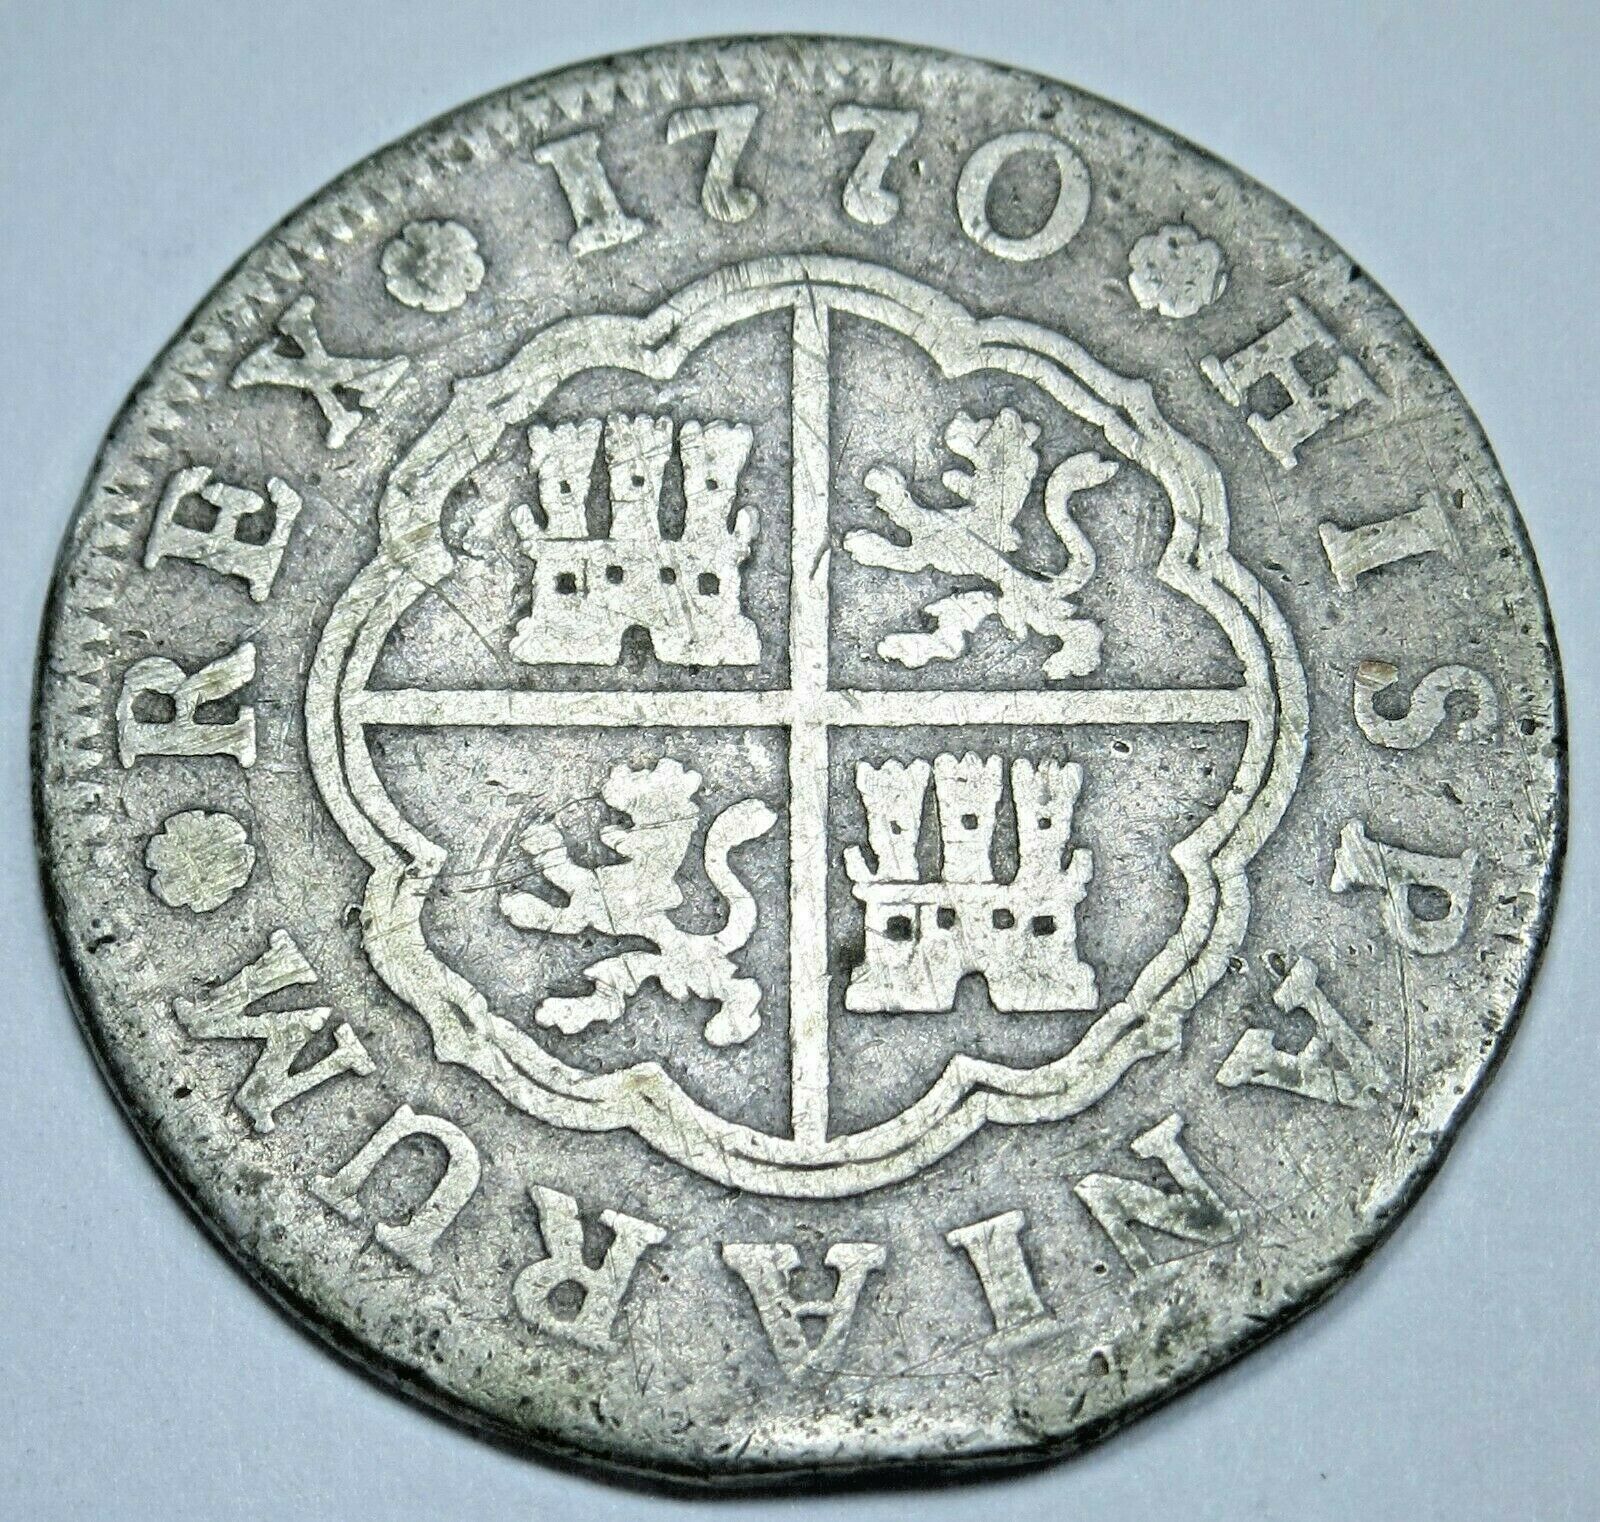 1770 Spanish Silver 2 Reales Antique 1700's Colonial Cross Pirate Treasure Coin